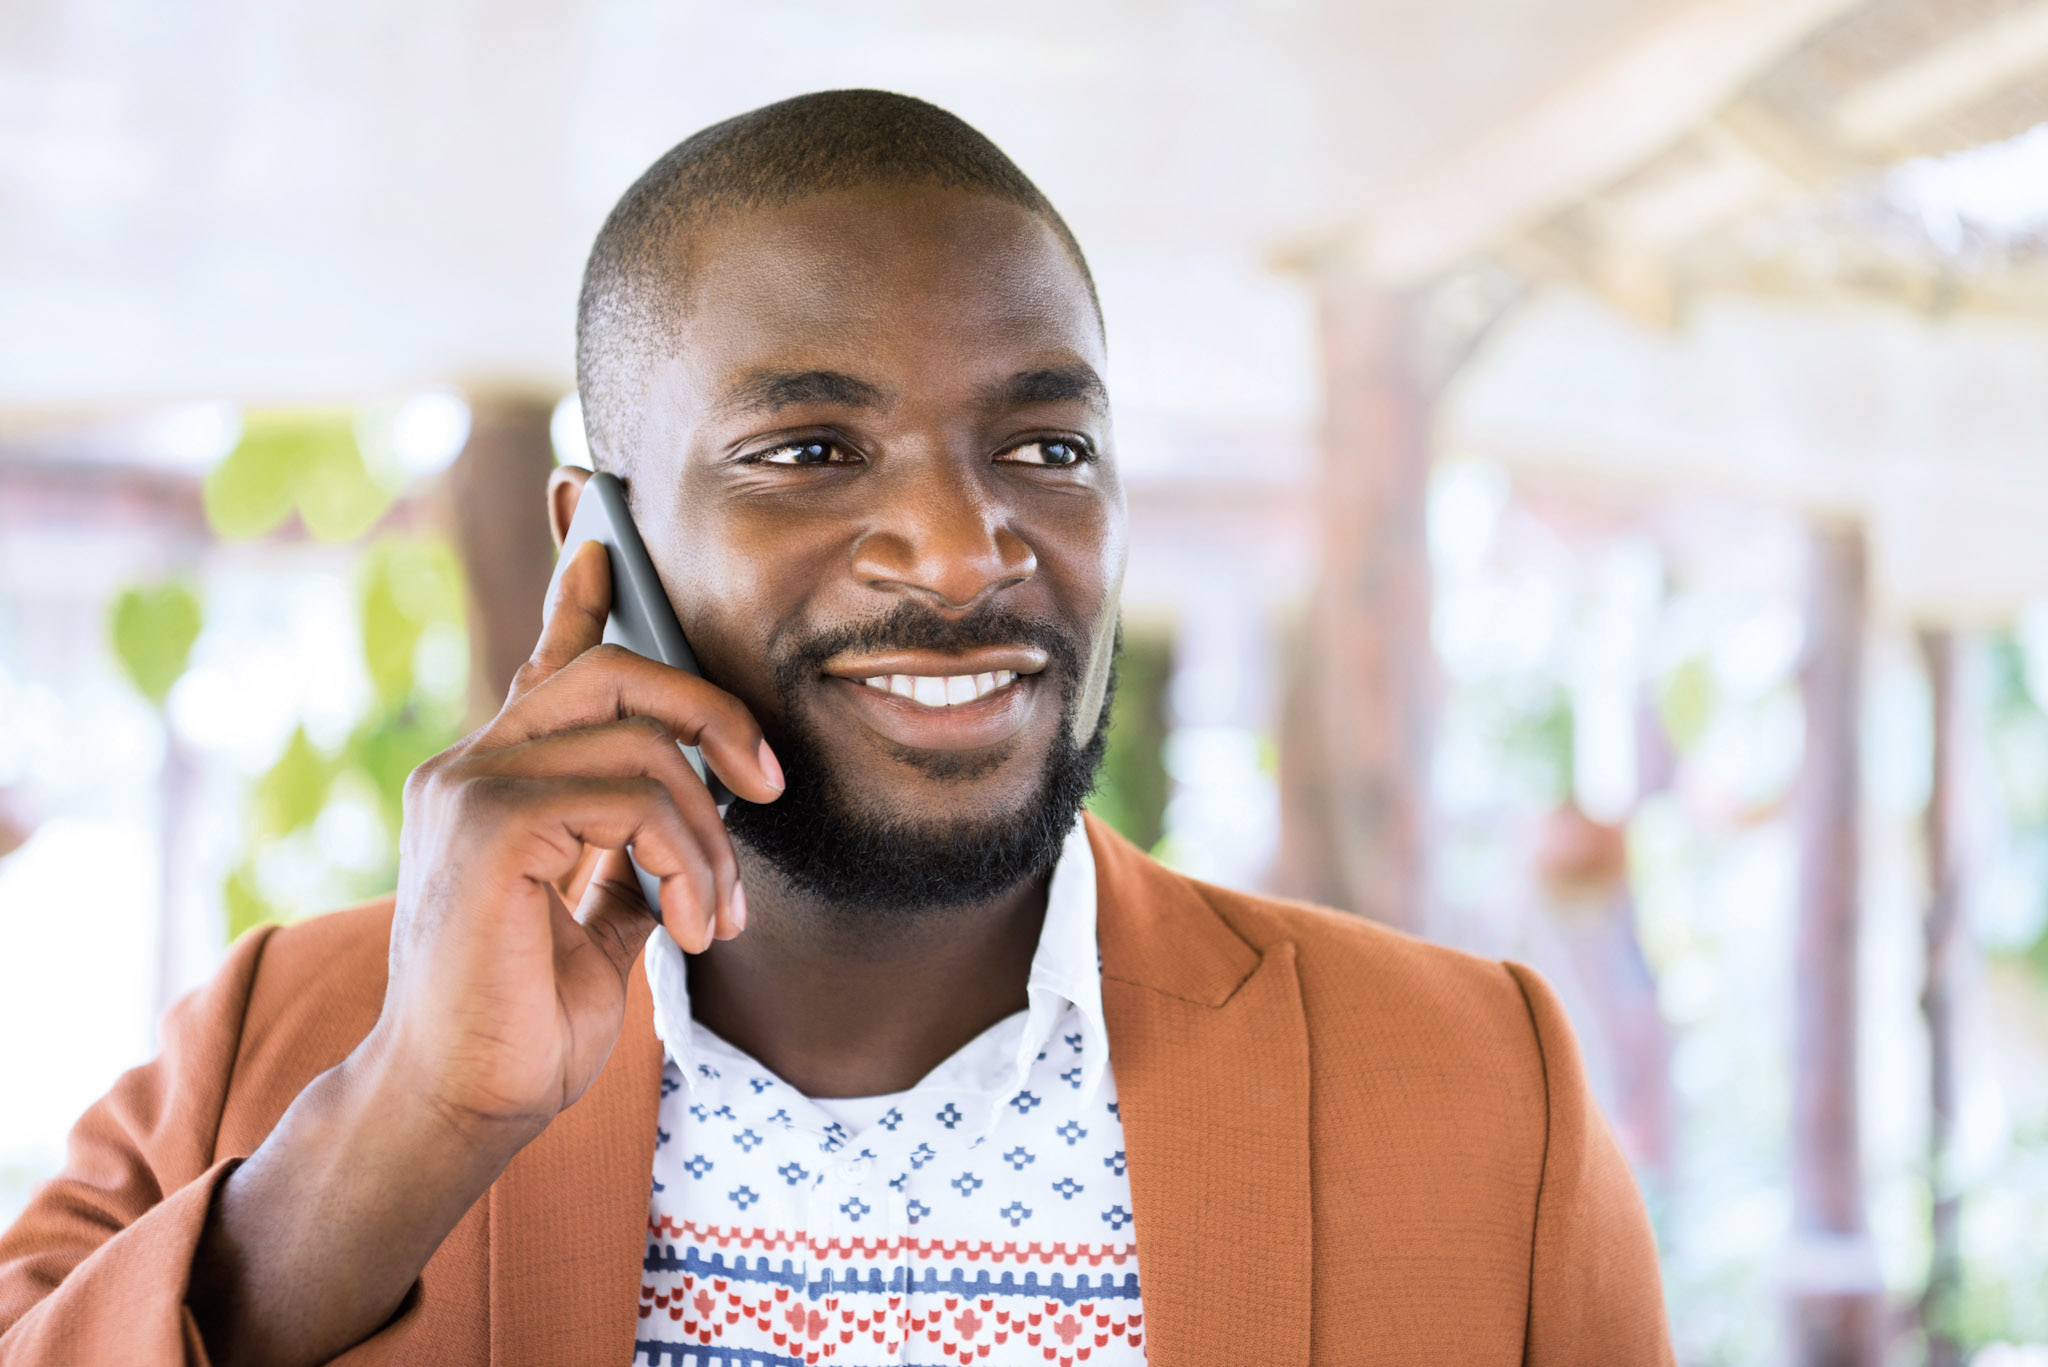 stock image of a man talking on a phone while standing outside